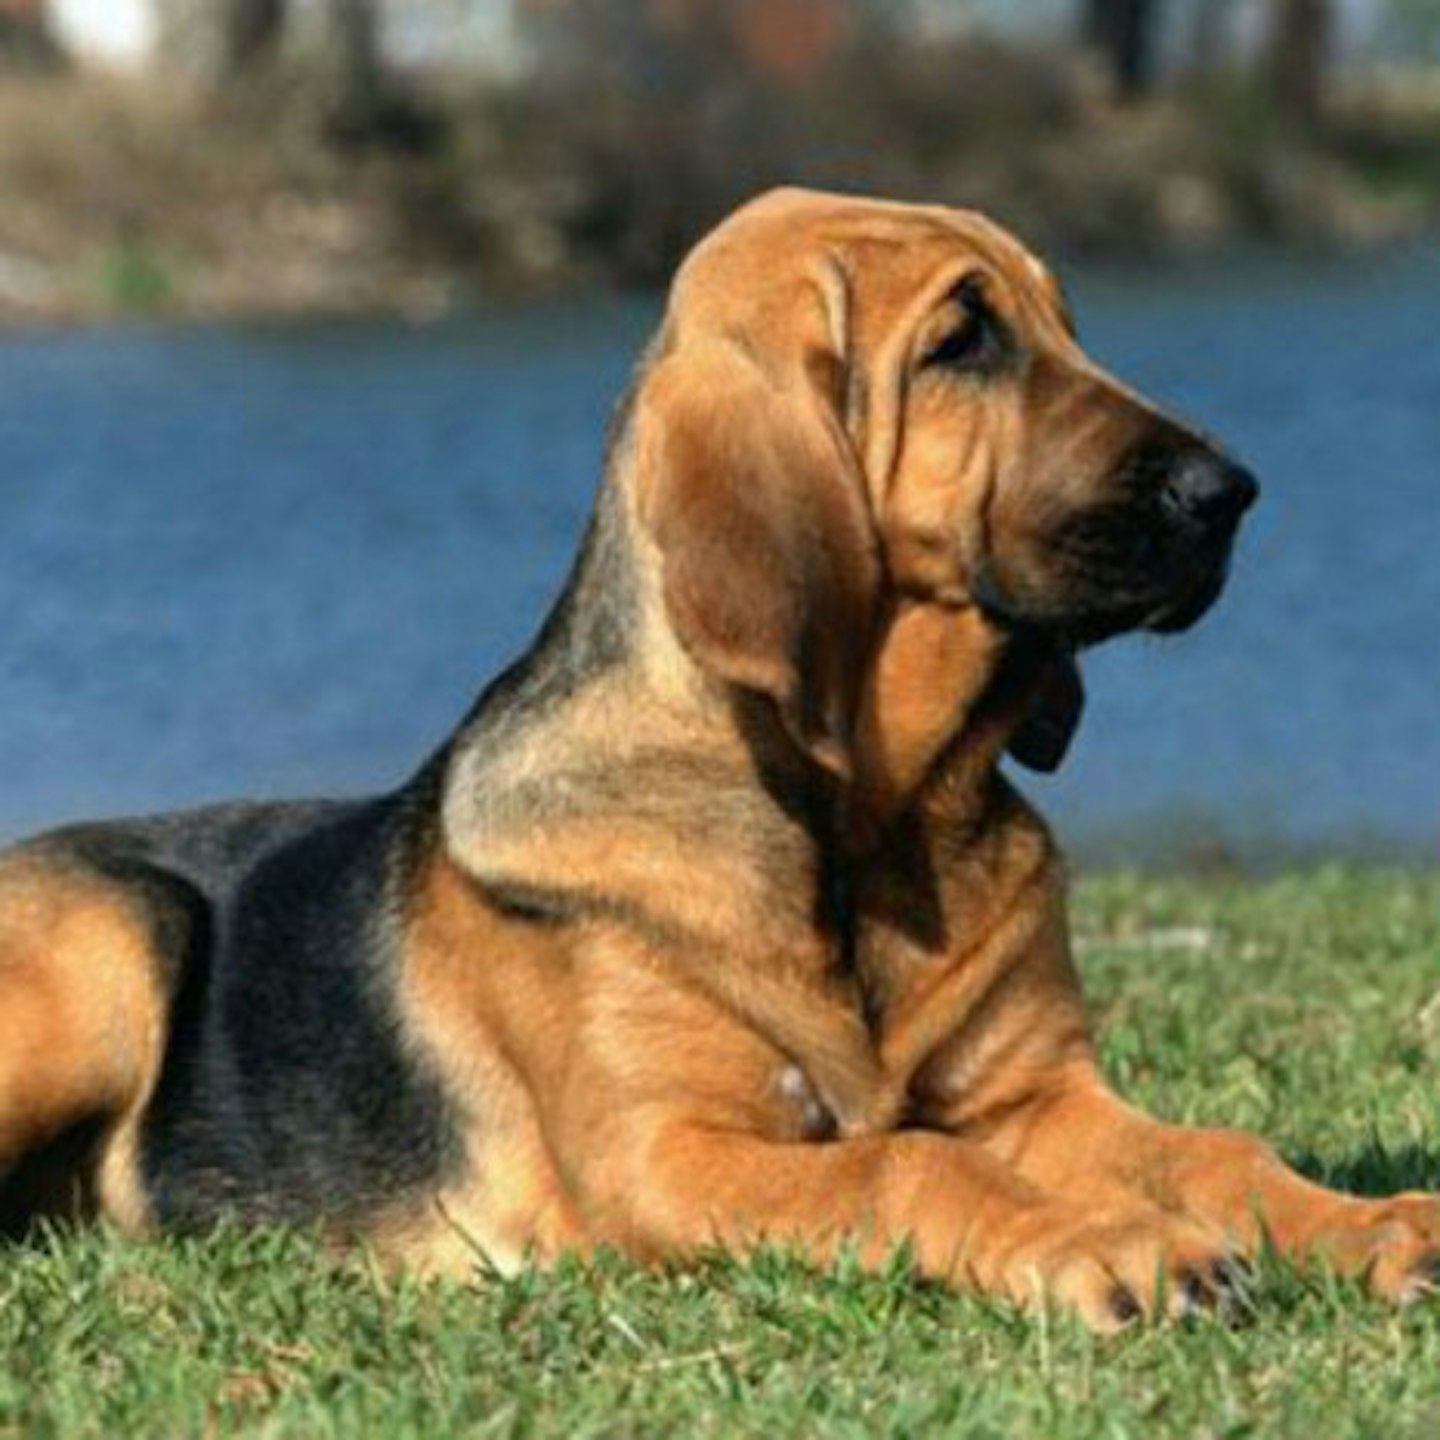 Pa is a bloodhound breed (image from Pinterest)